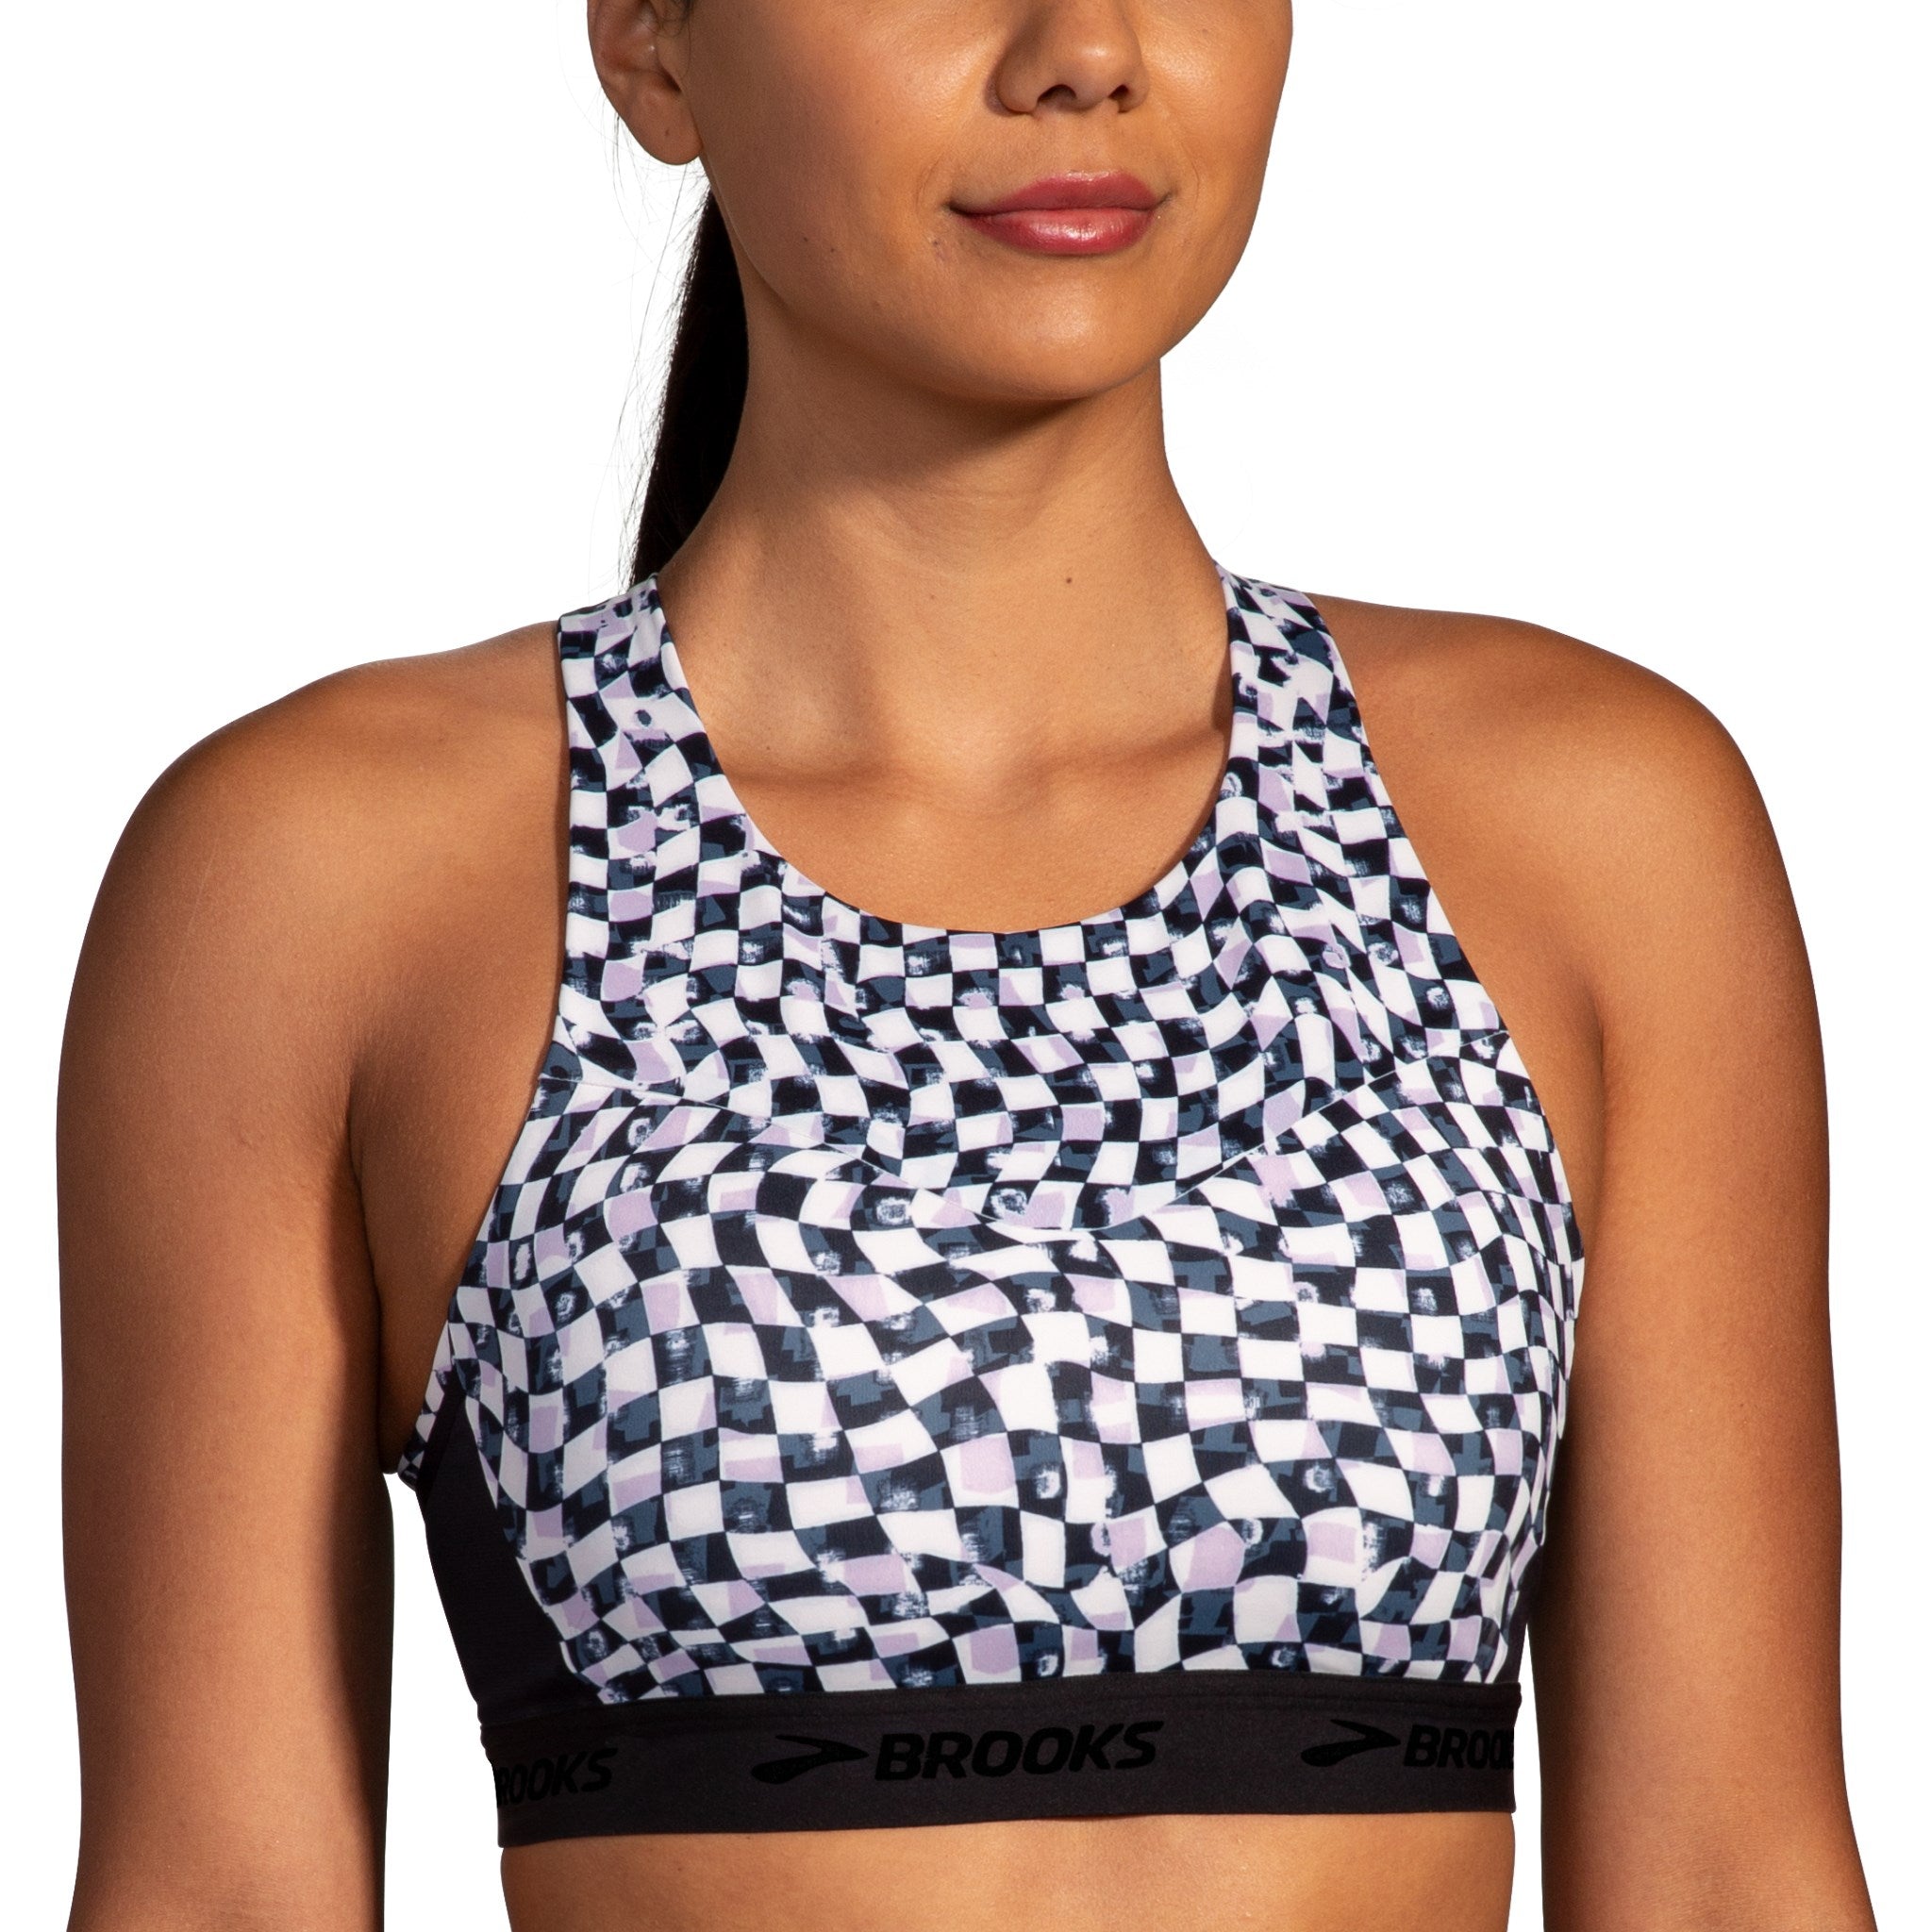  Brooks Women's 3 Pocket Sports Bra for Running, Workouts &  Sports - Black - 30 A/B : Clothing, Shoes & Jewelry